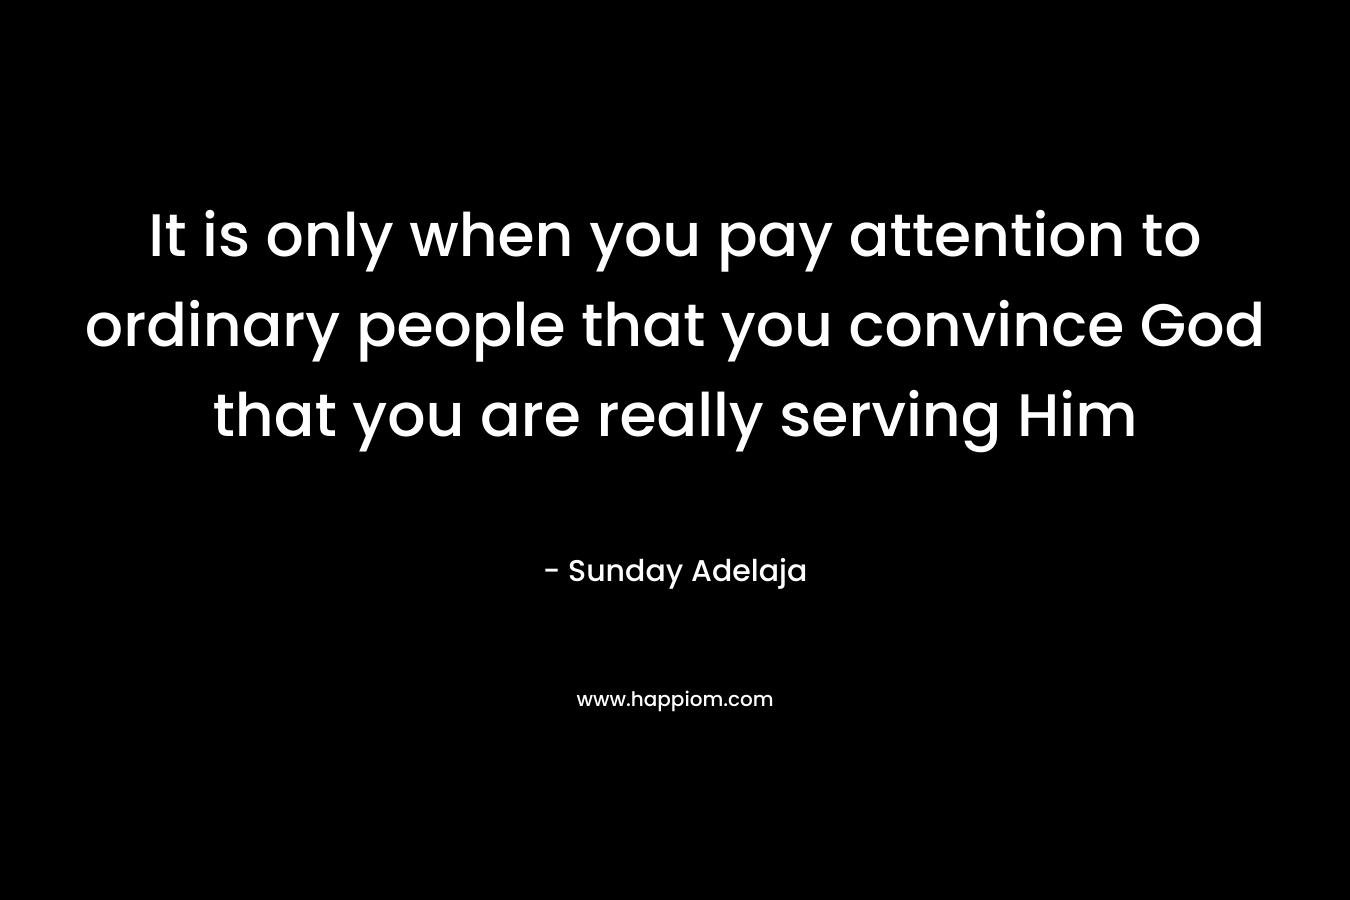 It is only when you pay attention to ordinary people that you convince God that you are really serving Him